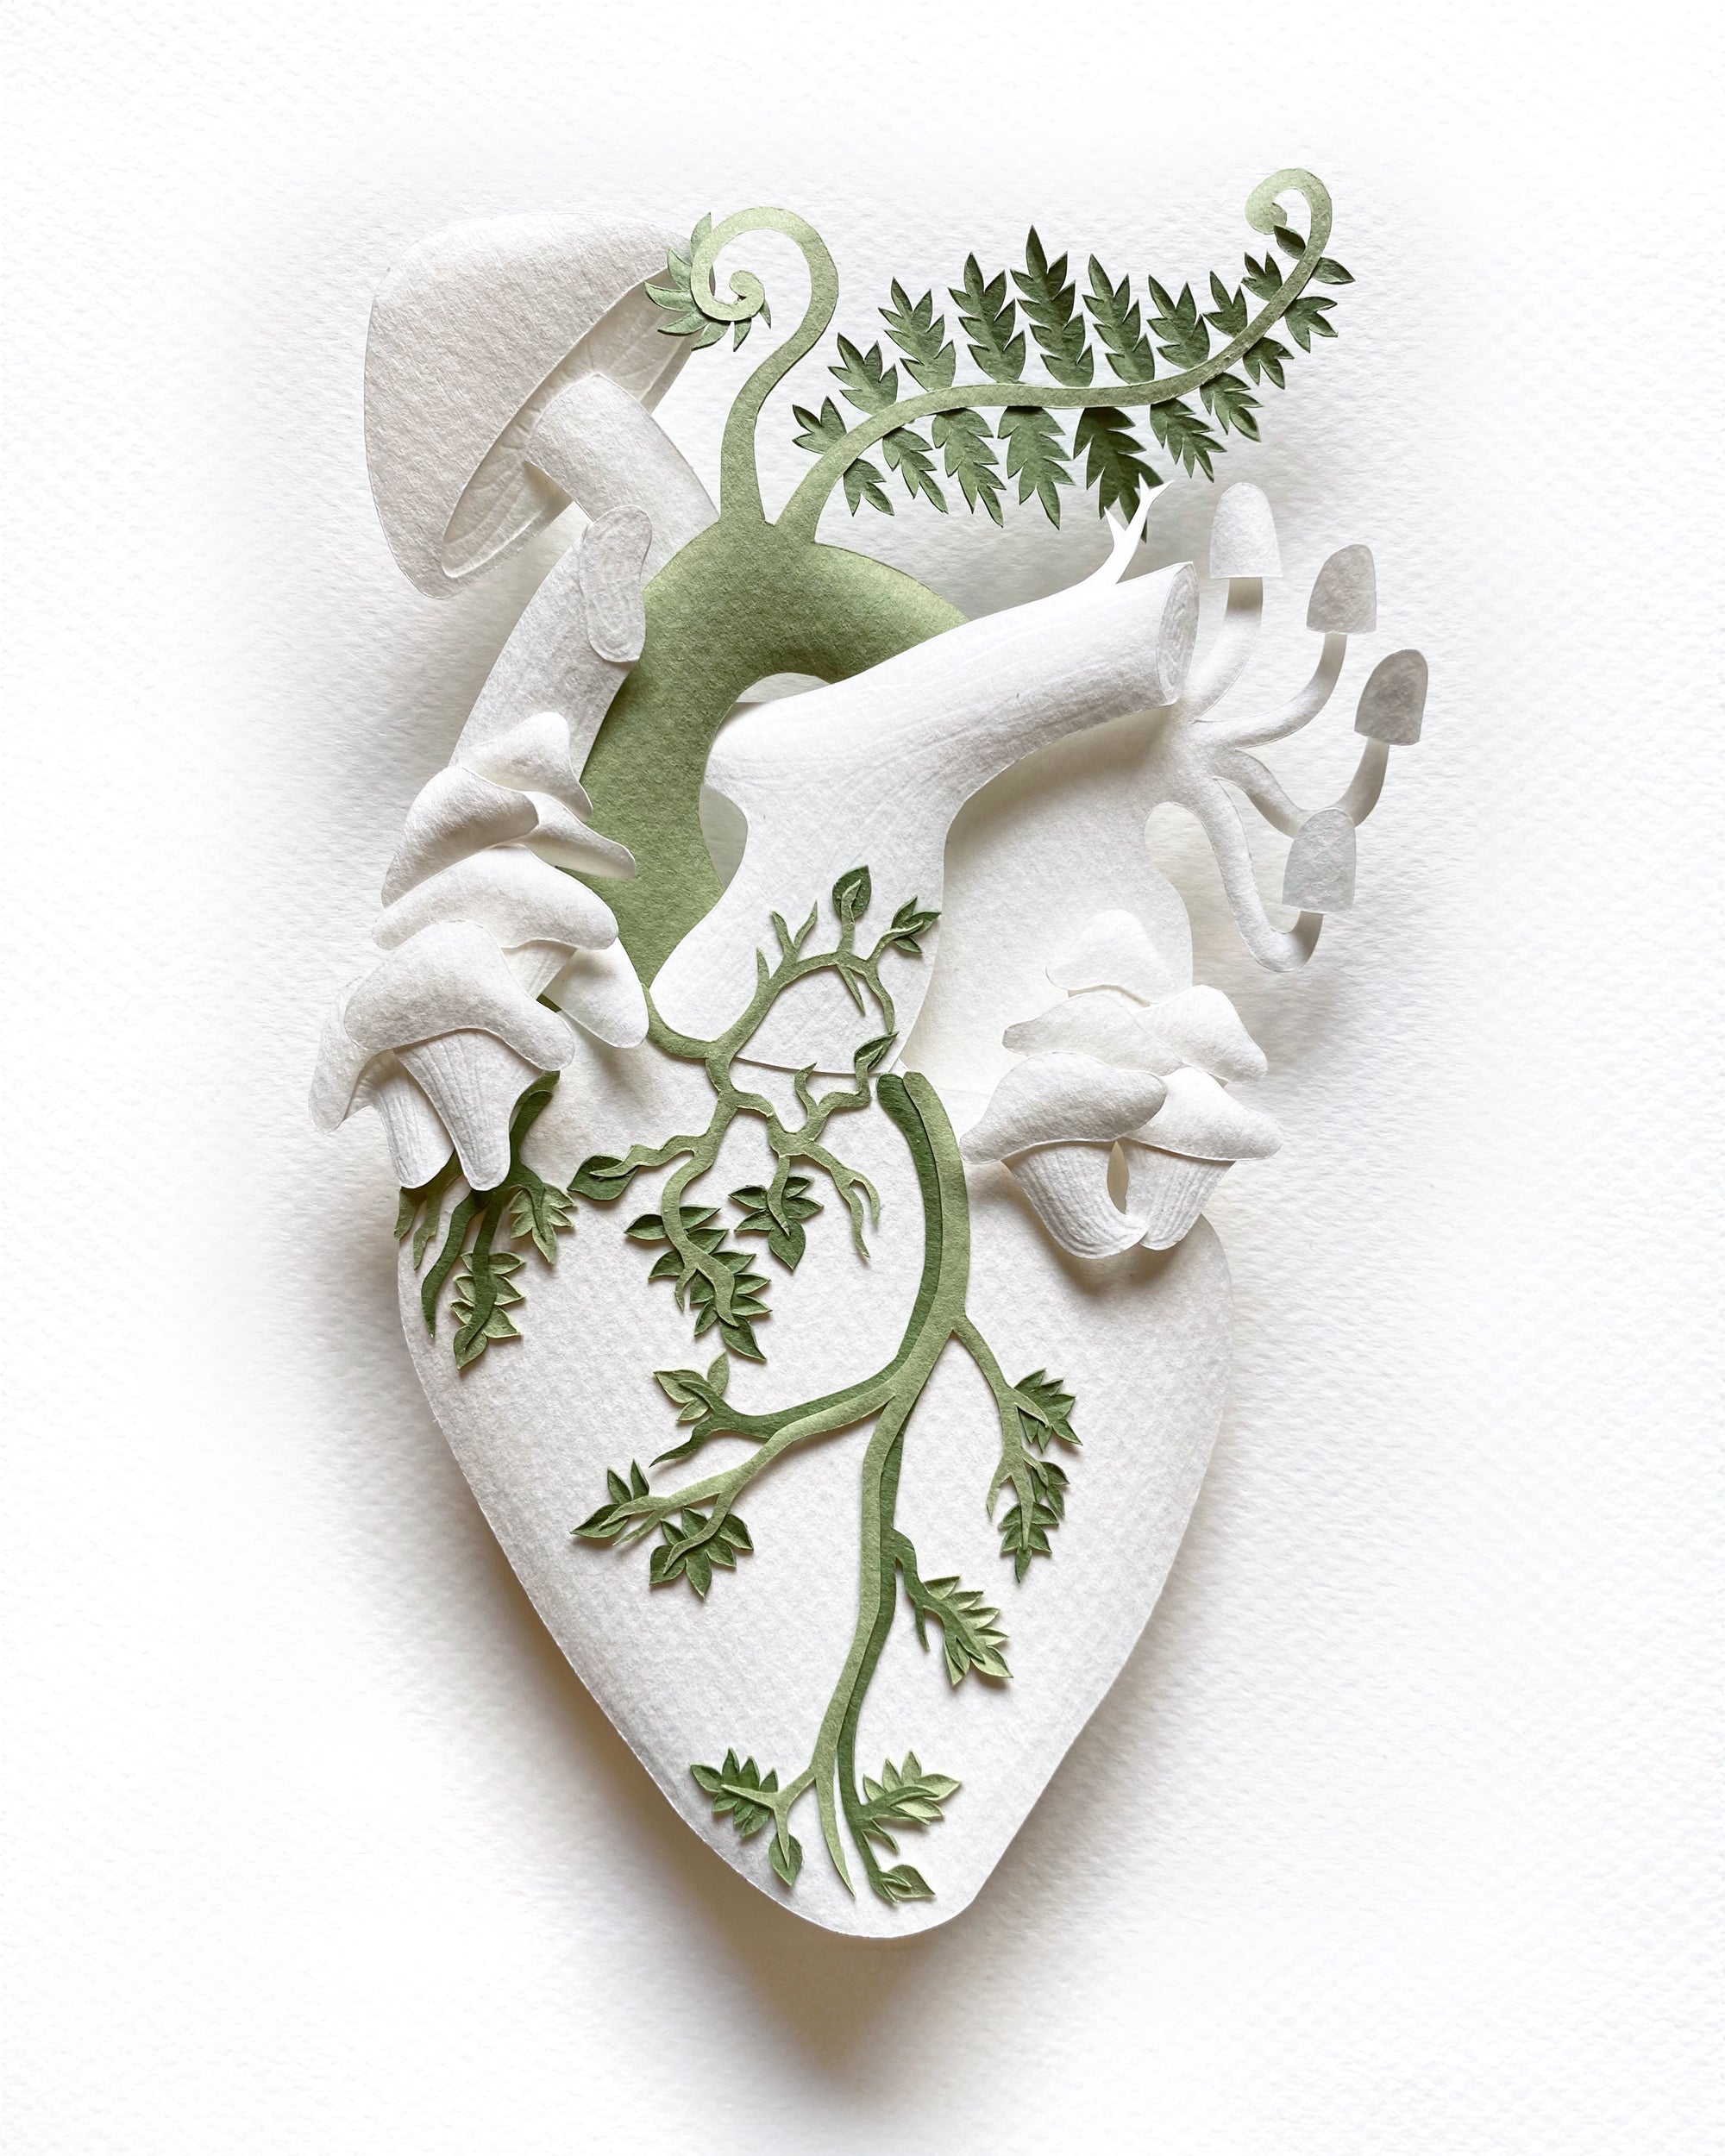 Antomical heart with ferns and mushrooms made with hand cut paper